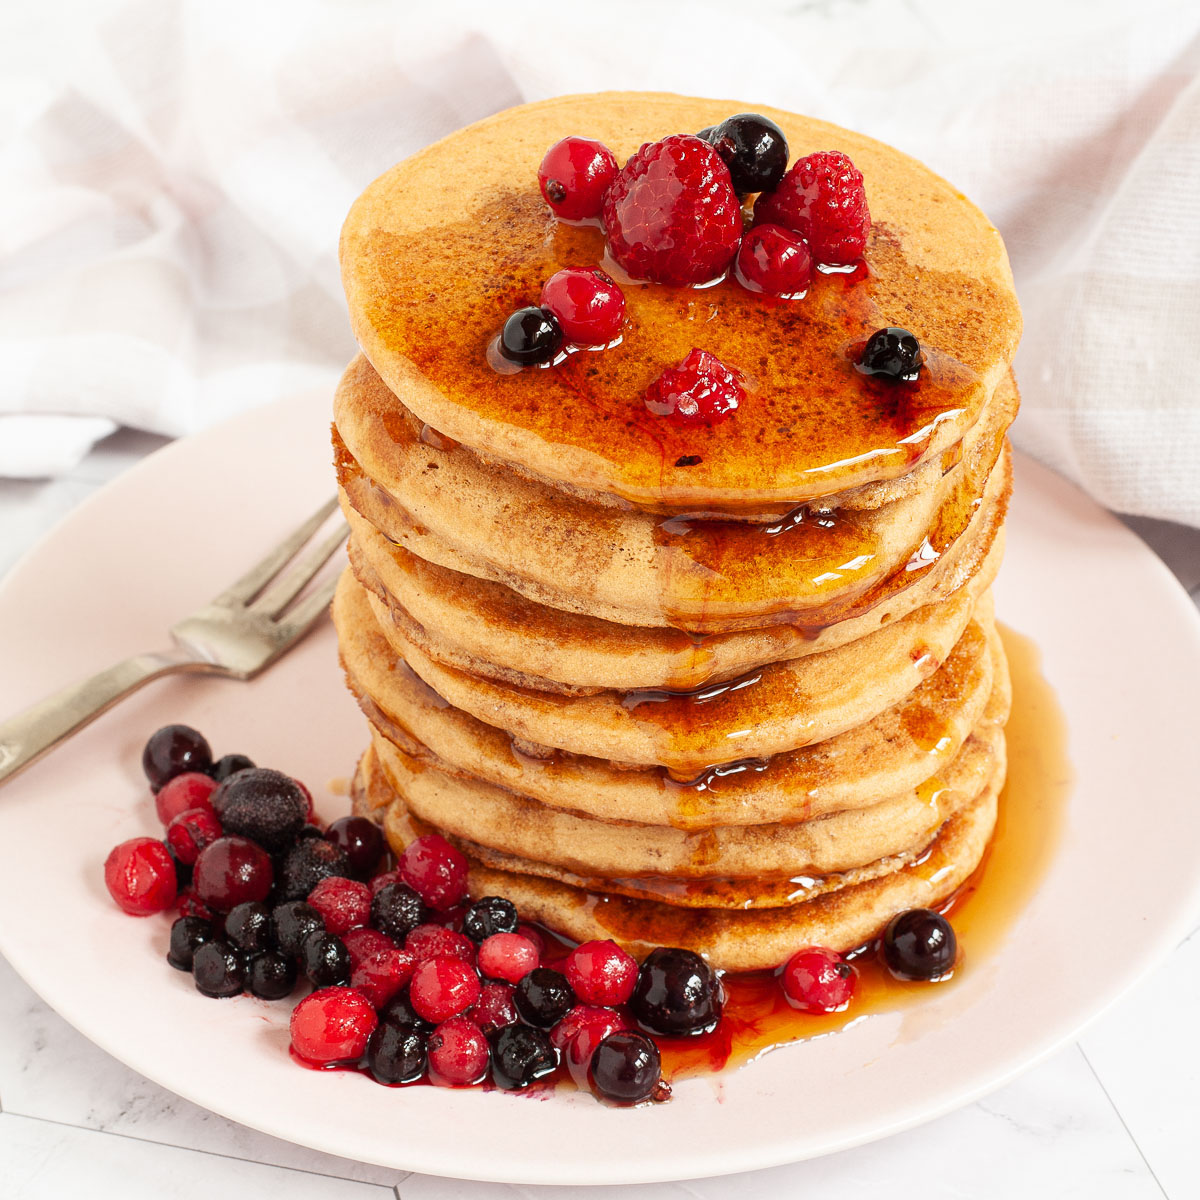 Pink plate with a stack of pancakes topped with black and red berries and maple syrup